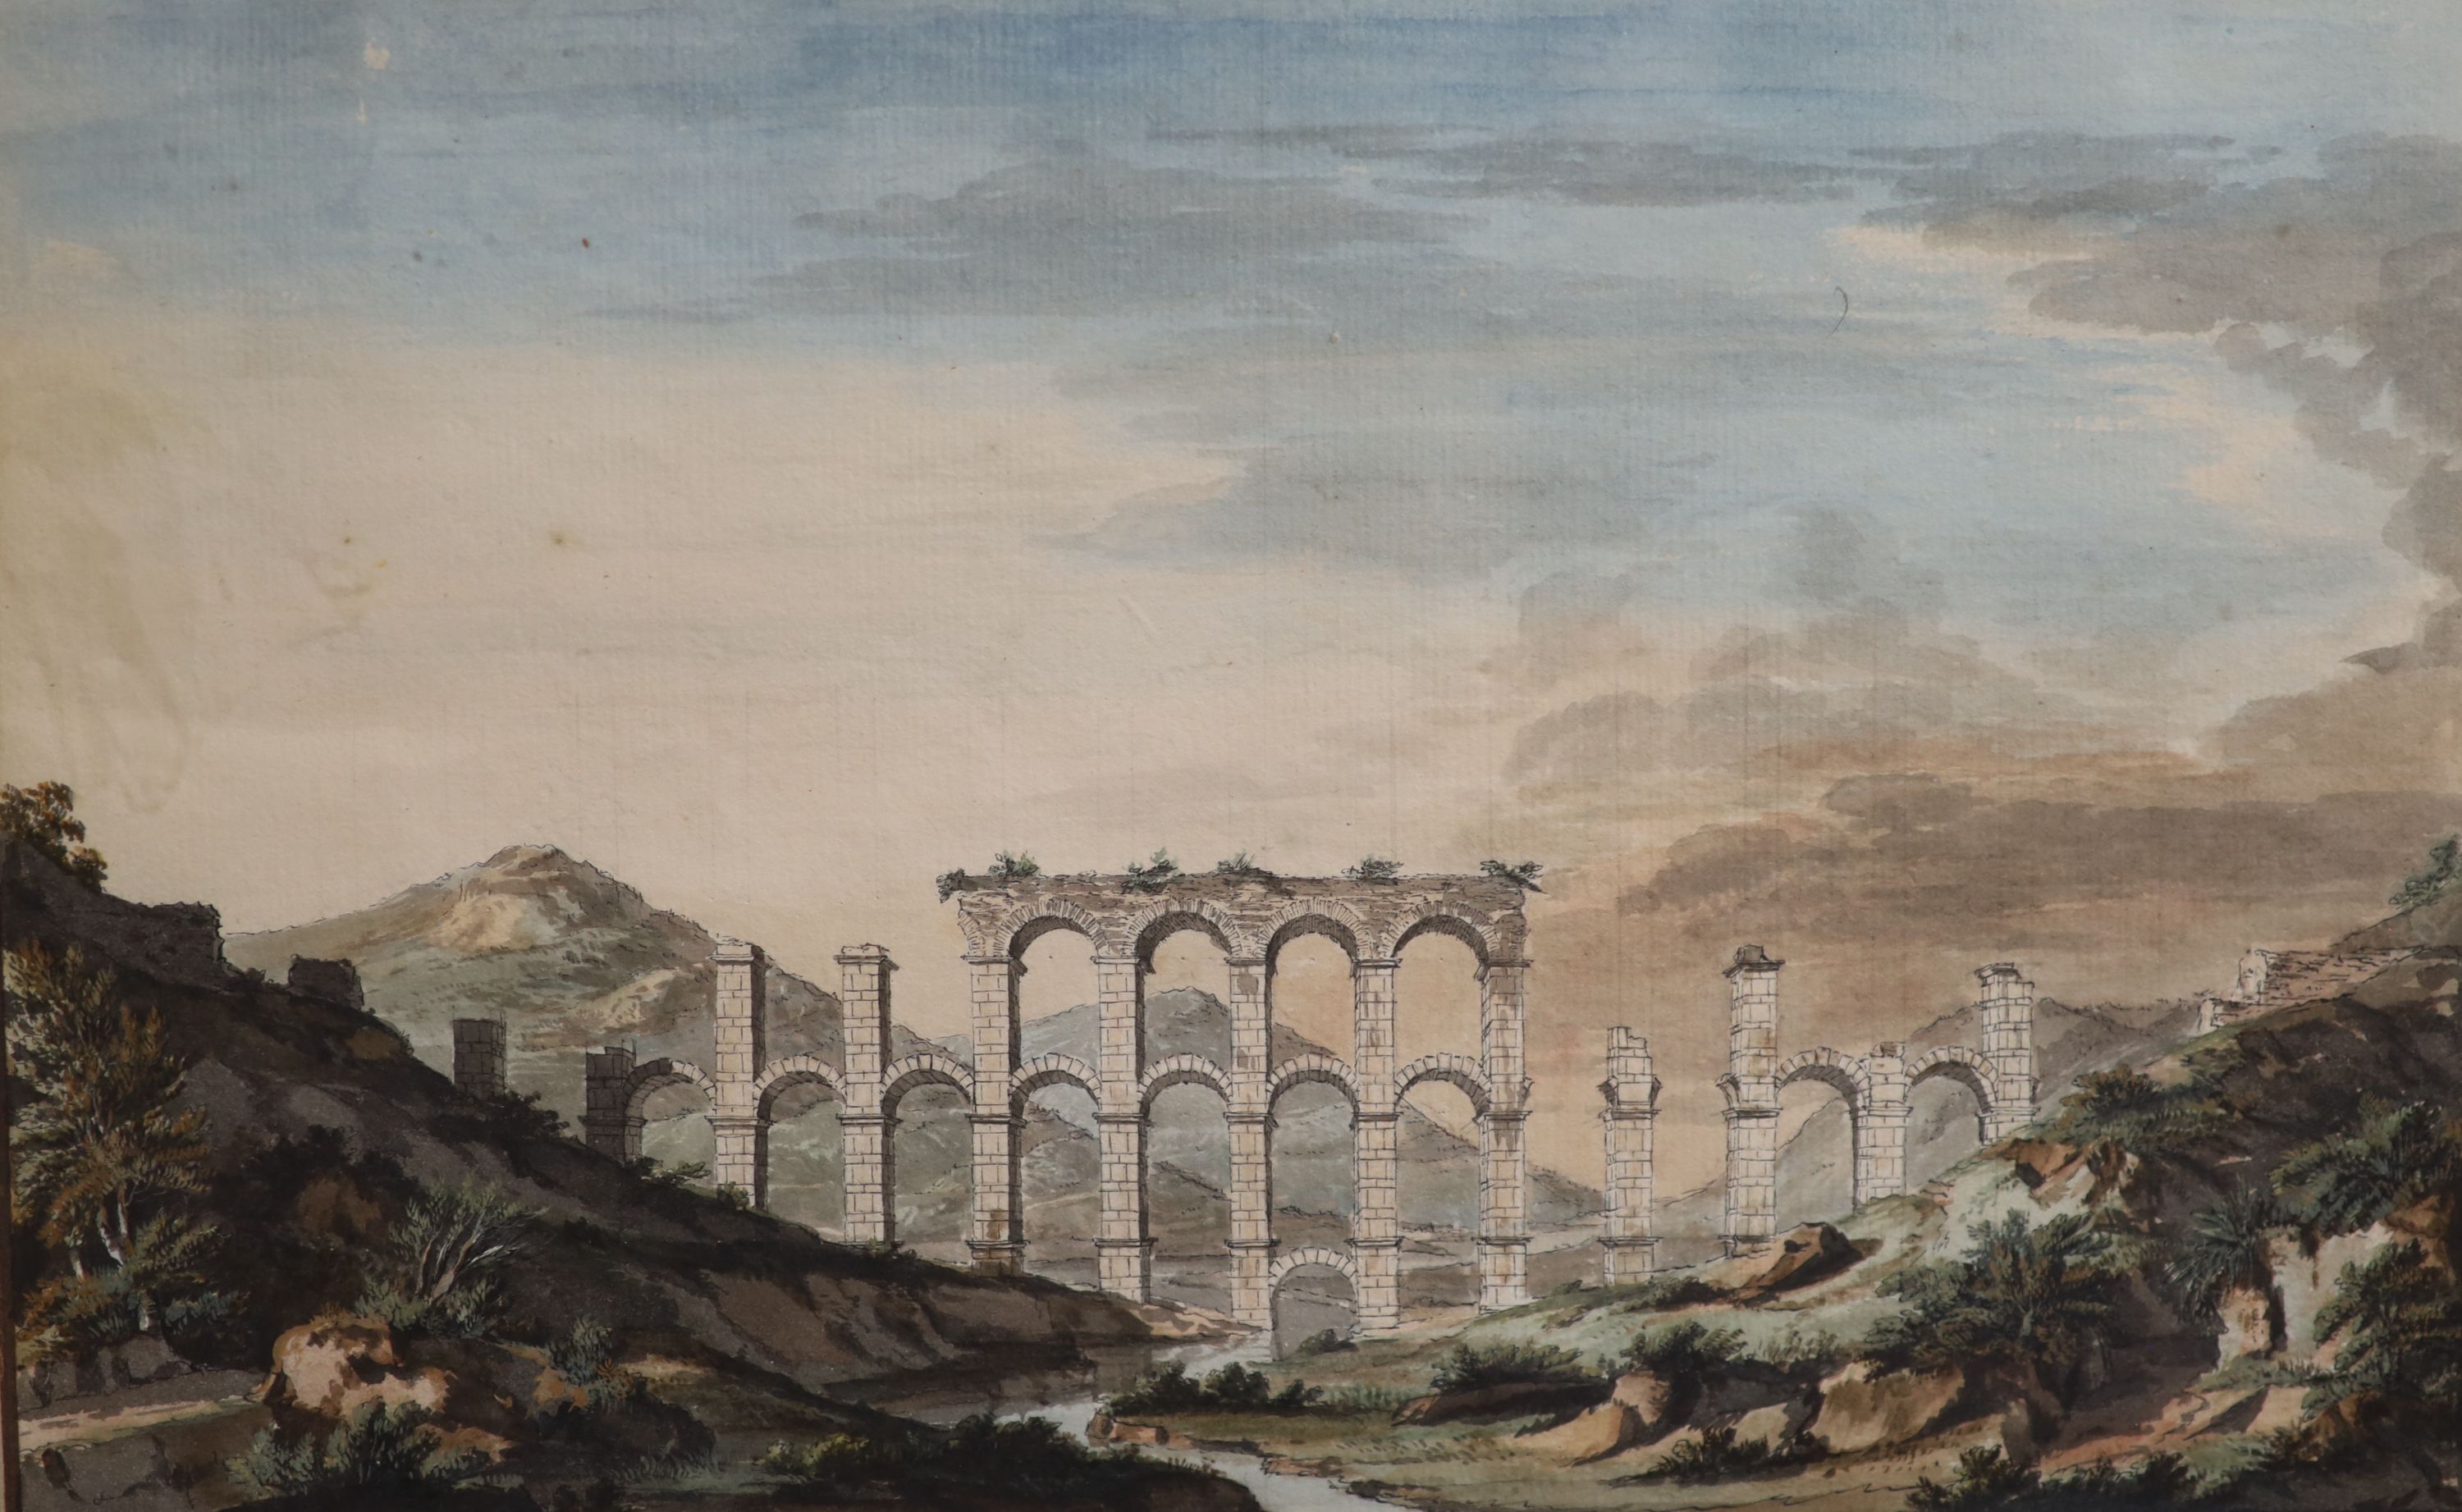 Giovanni Batista Borra (1712-1786), A view of the Roman aqueduct near Mytilene of the Island of Lesbos, pen, ink and watercolour, 20 x 31cm